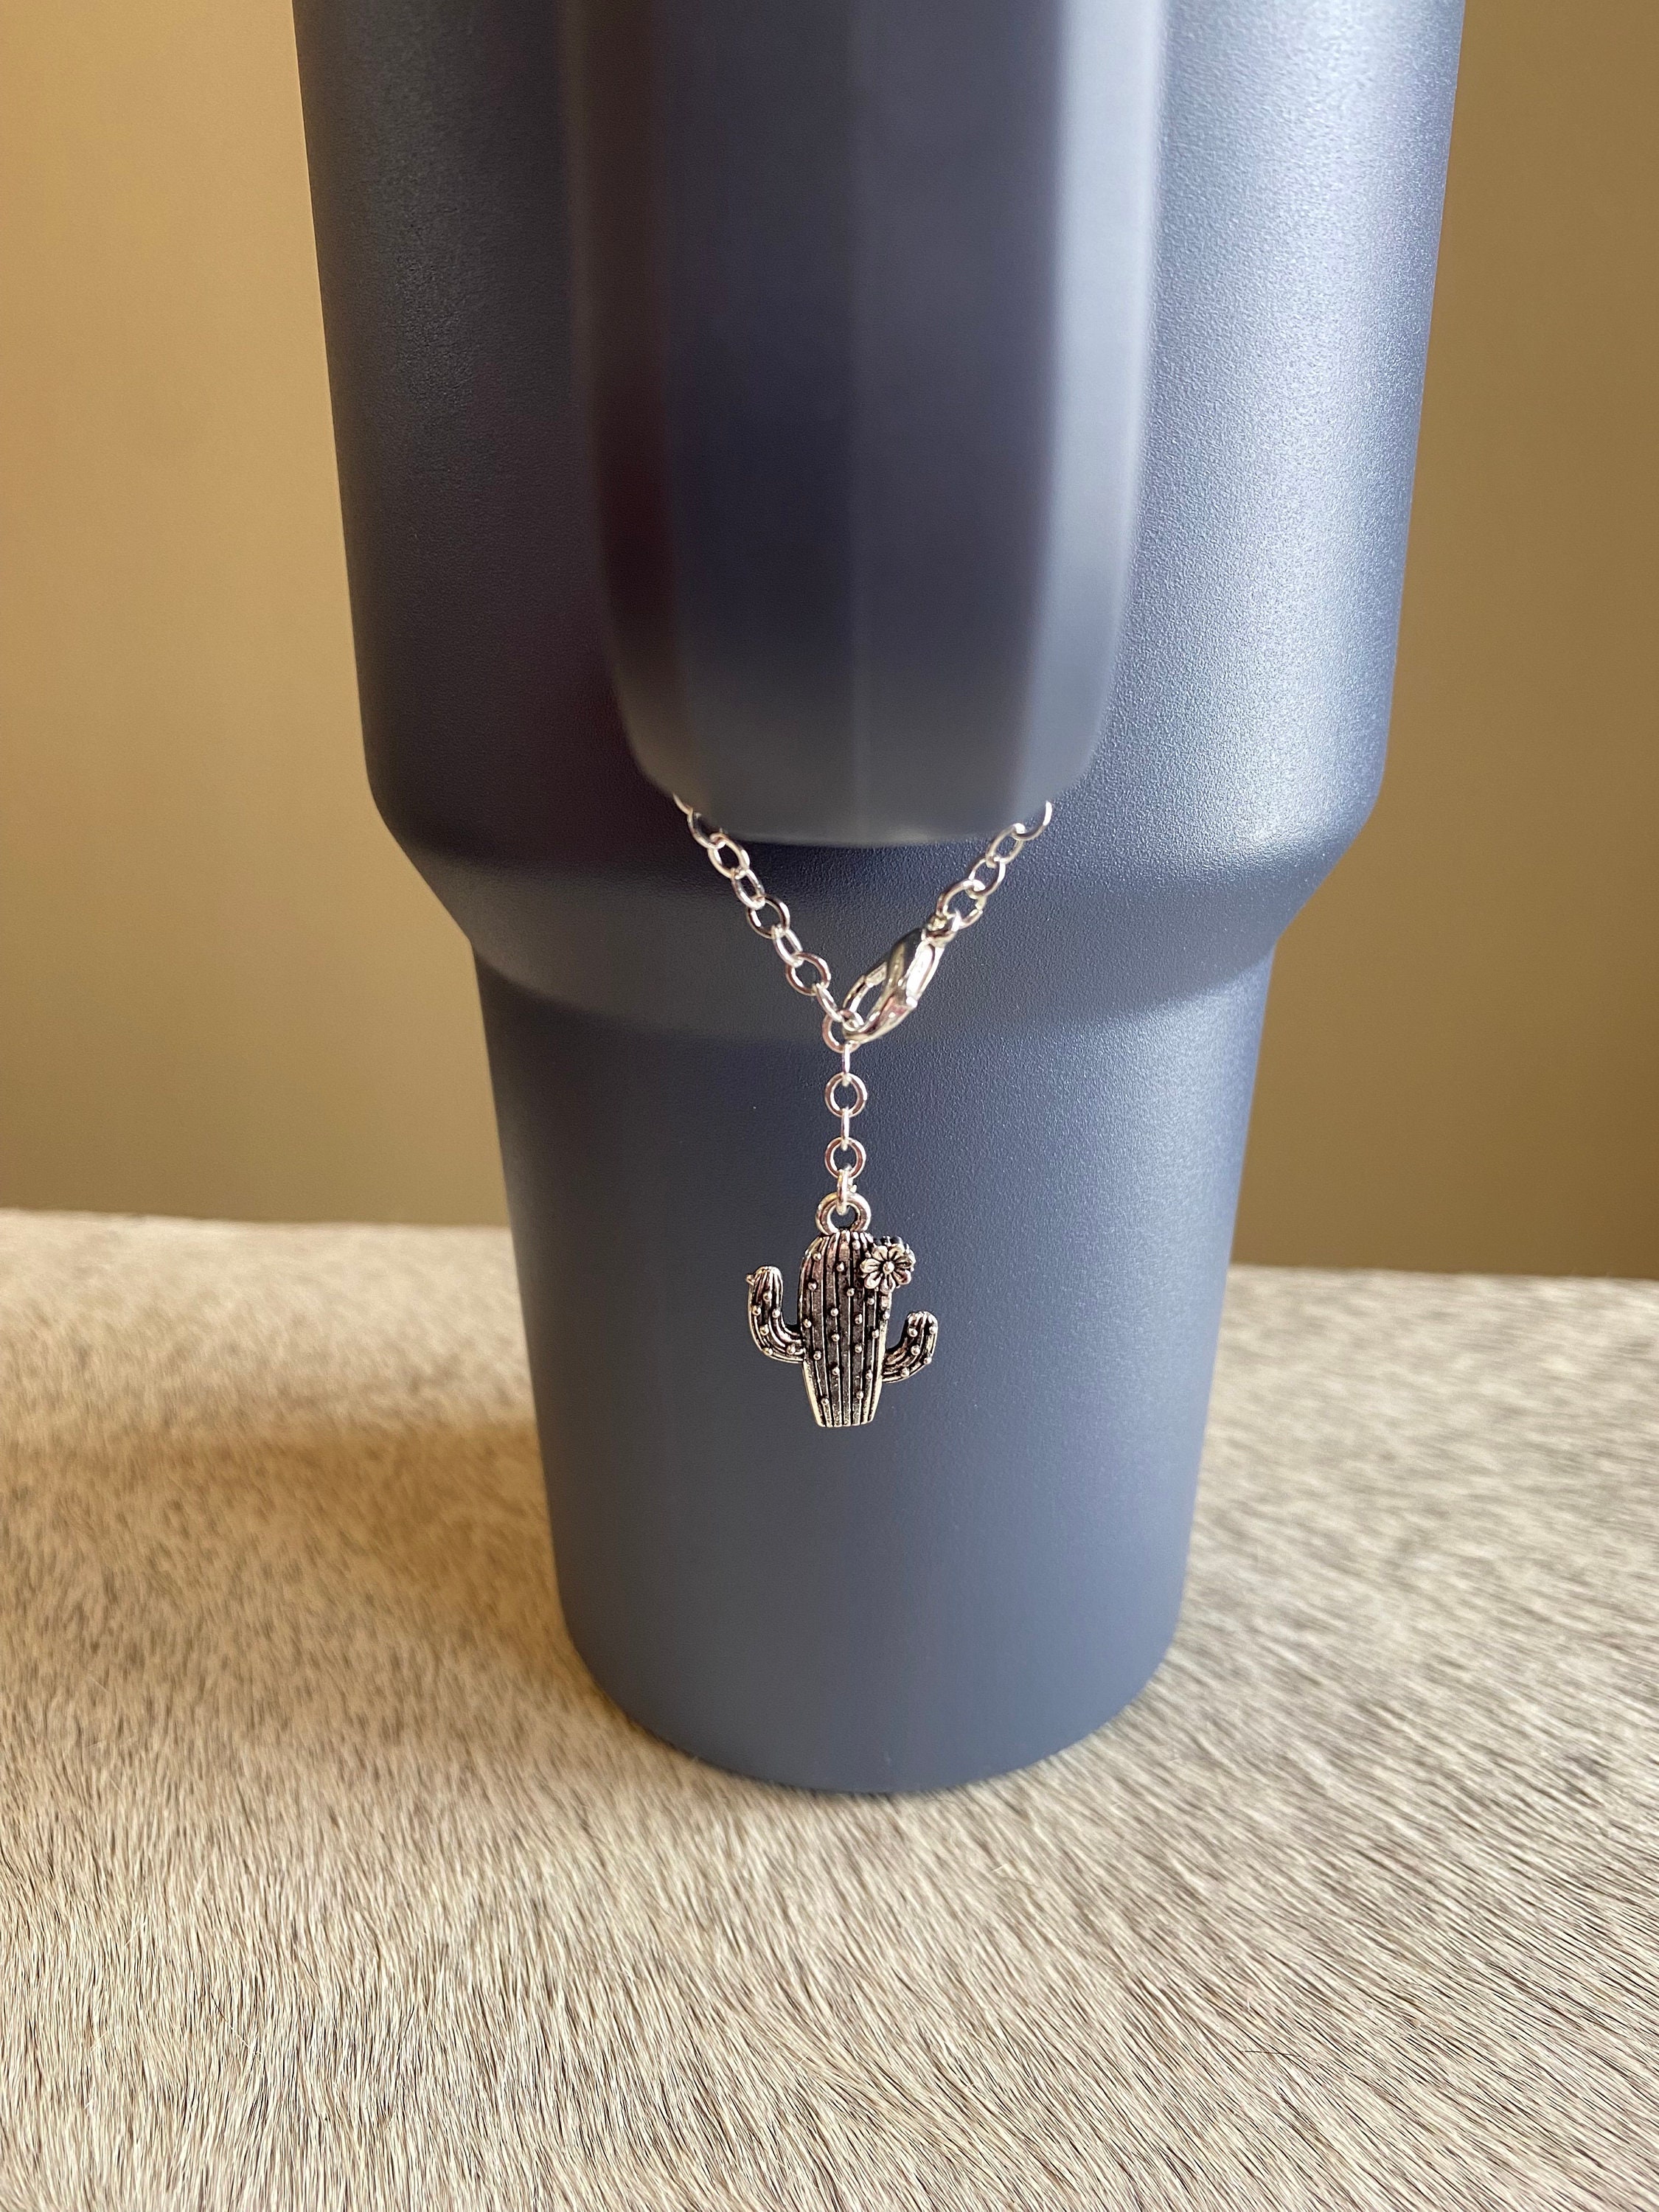 Stanley Cup Charms | Wear Bracha Jewelry | High Quality Jewelry That Gives Back